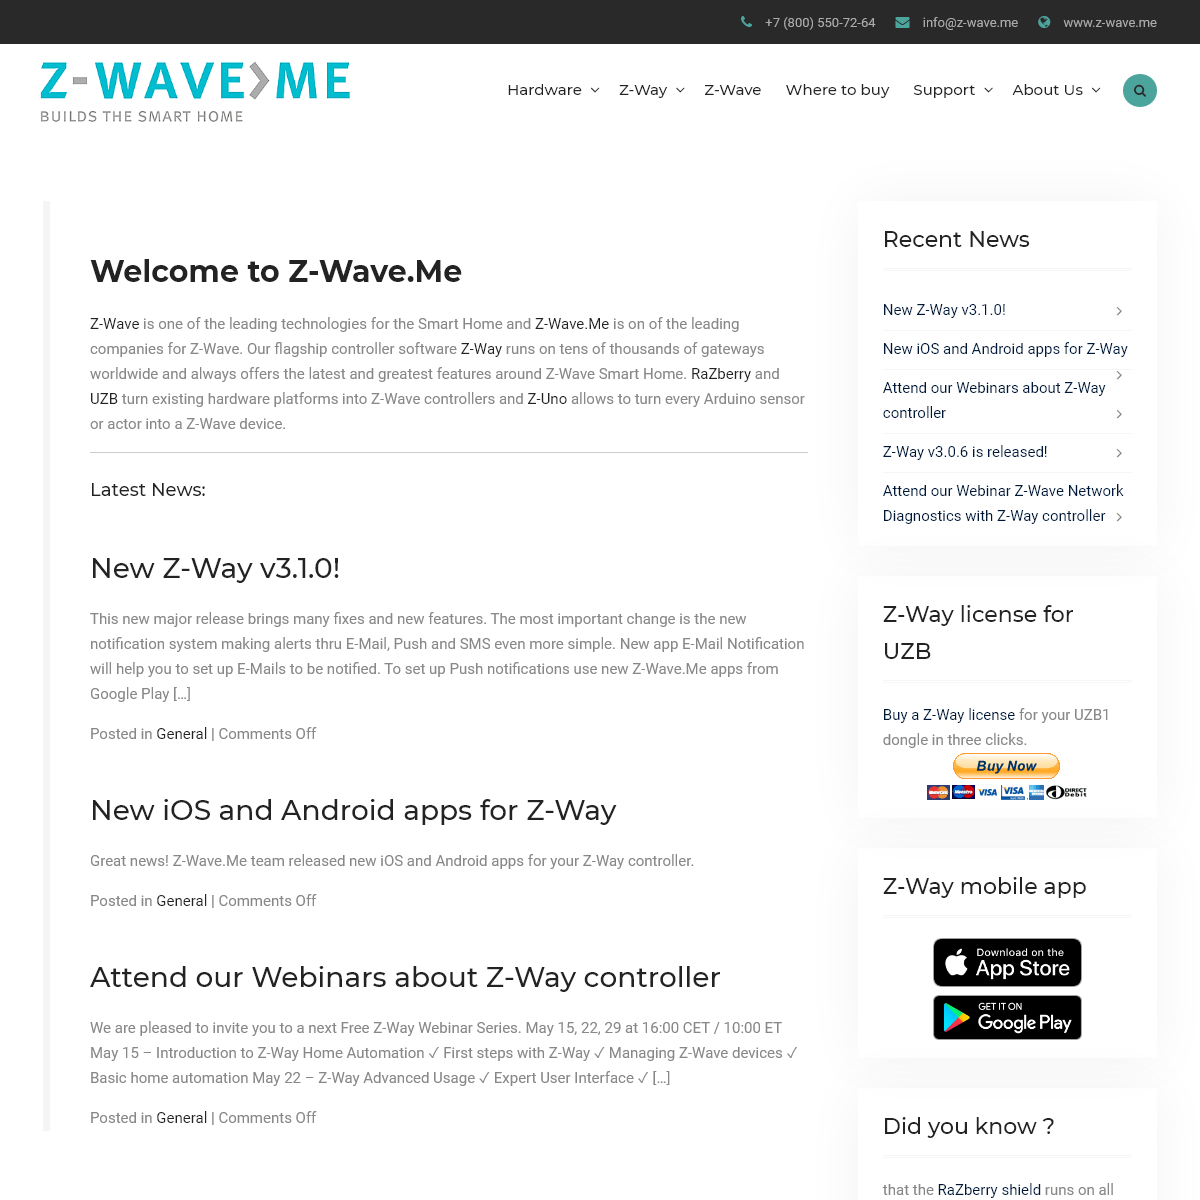 A complete backup of z-wave.me